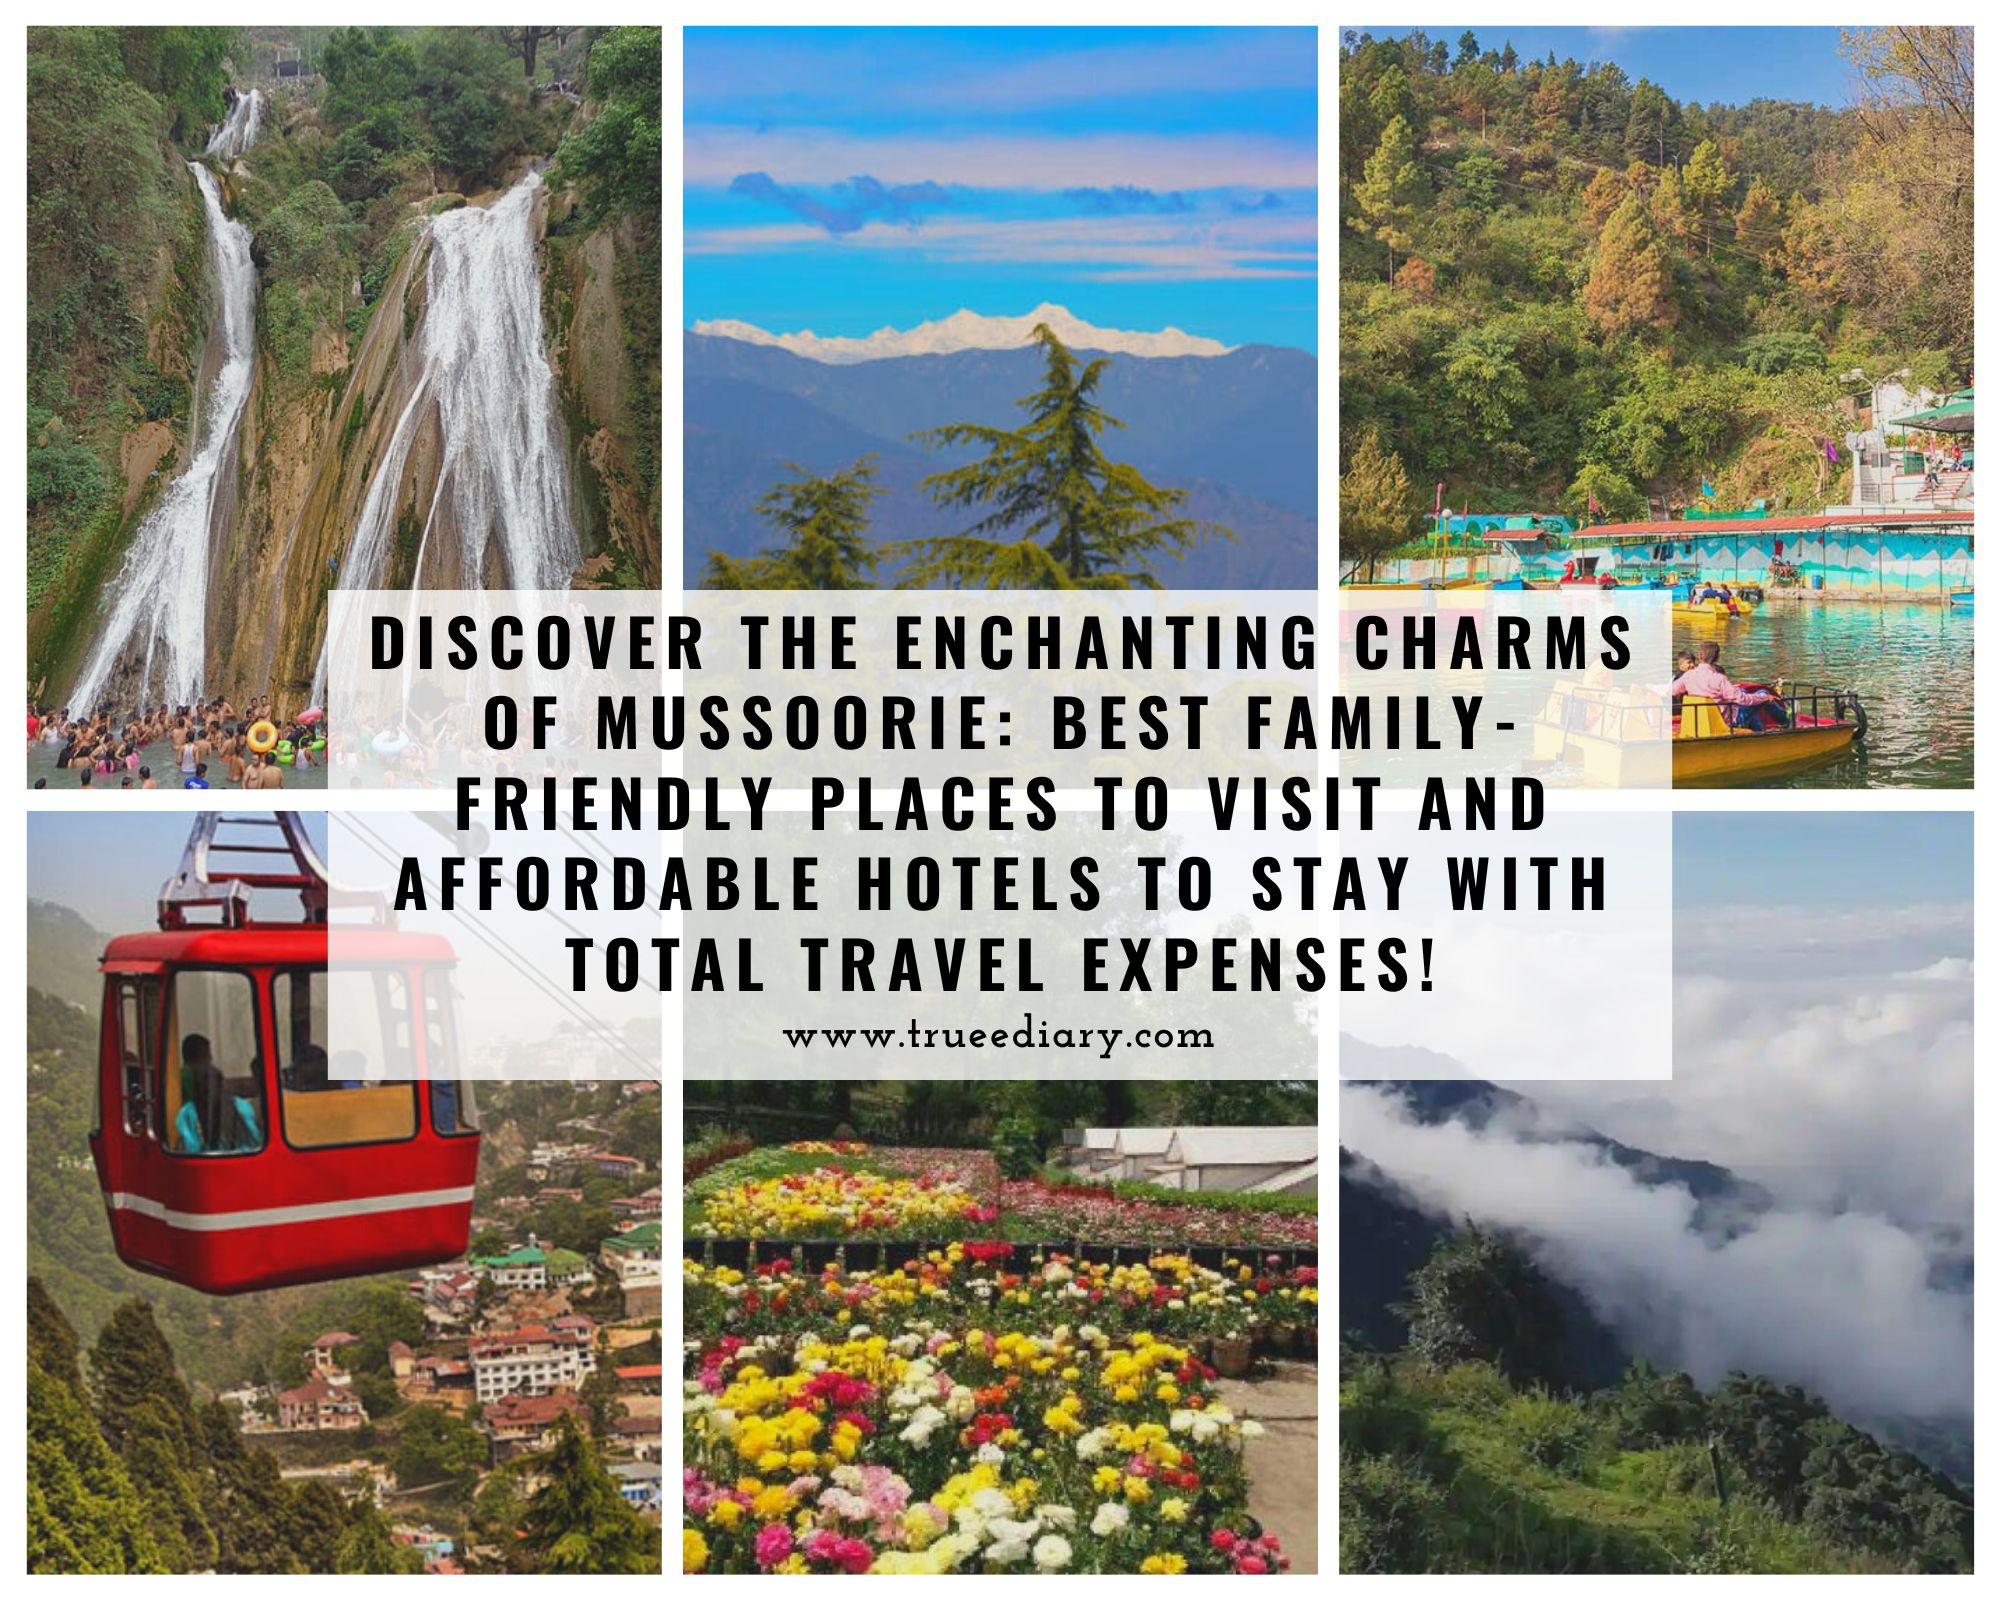 Discover the Enchanting Charms of Mussoorie Best Family-Friendly Places to Visit and Affordable Hotels to Stay With Total Travel Expenses!